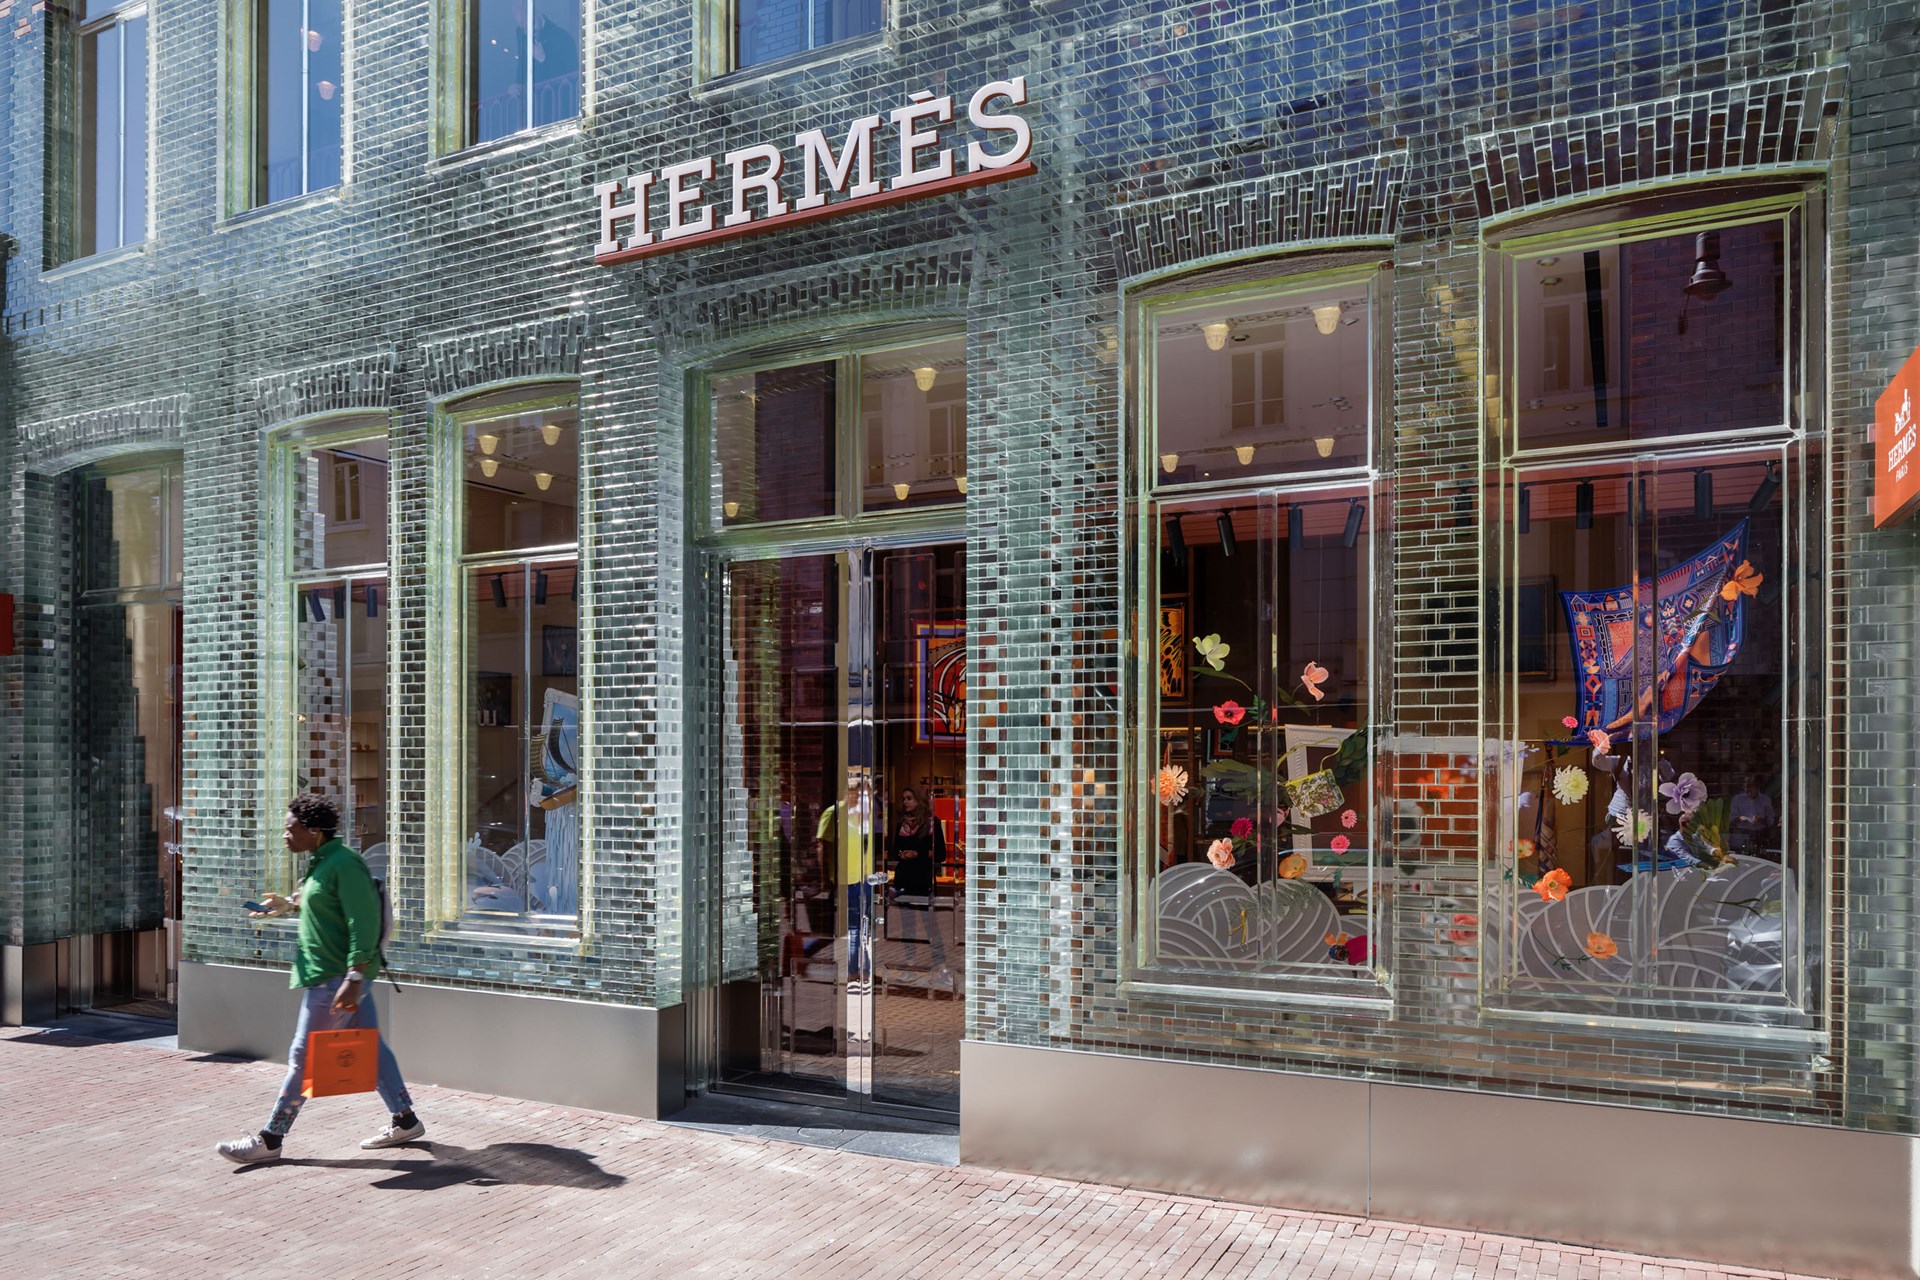 A glass storefront with an Hermes sign, presented at Facades+ L.A. 2019